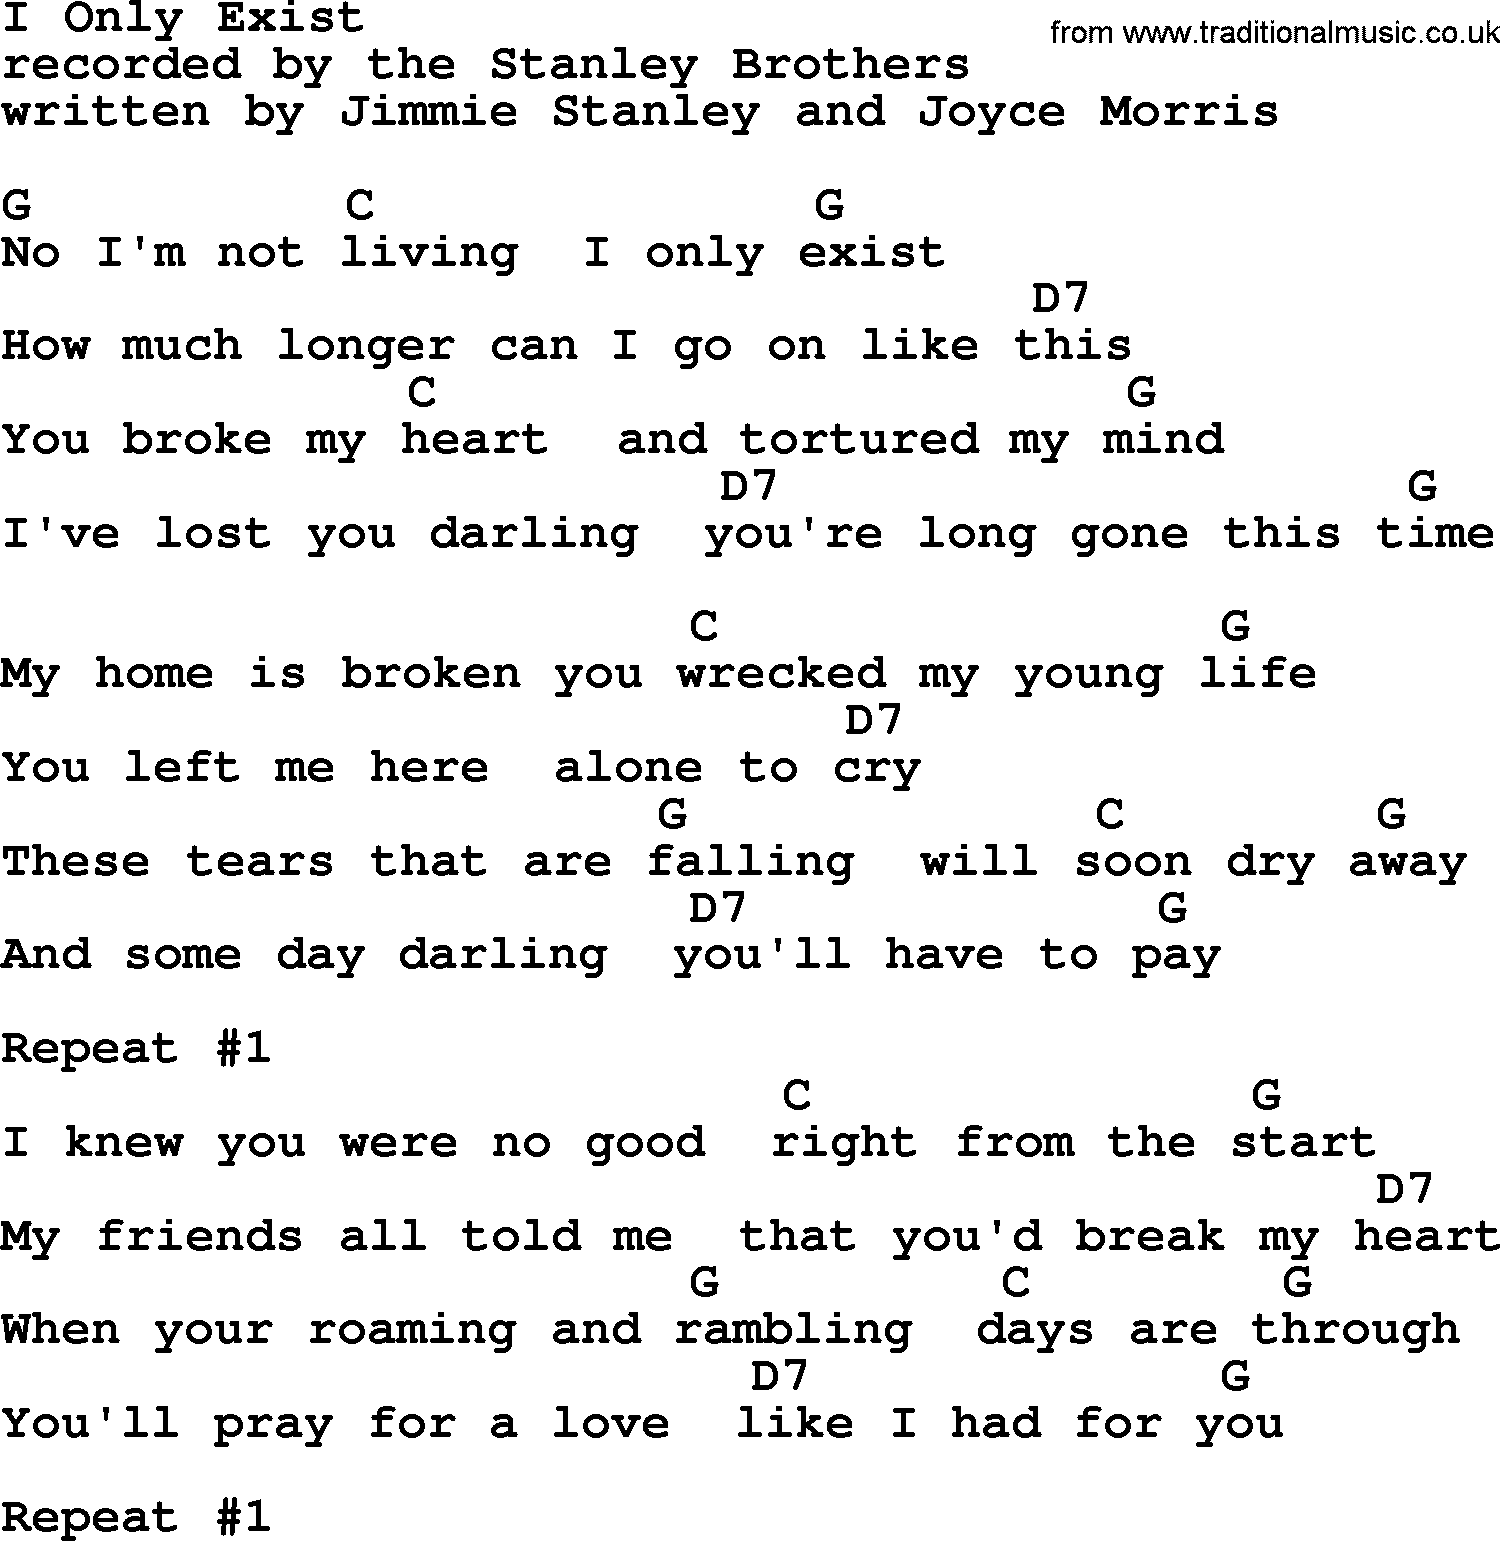 Bluegrass song: I Only Exist, lyrics and chords